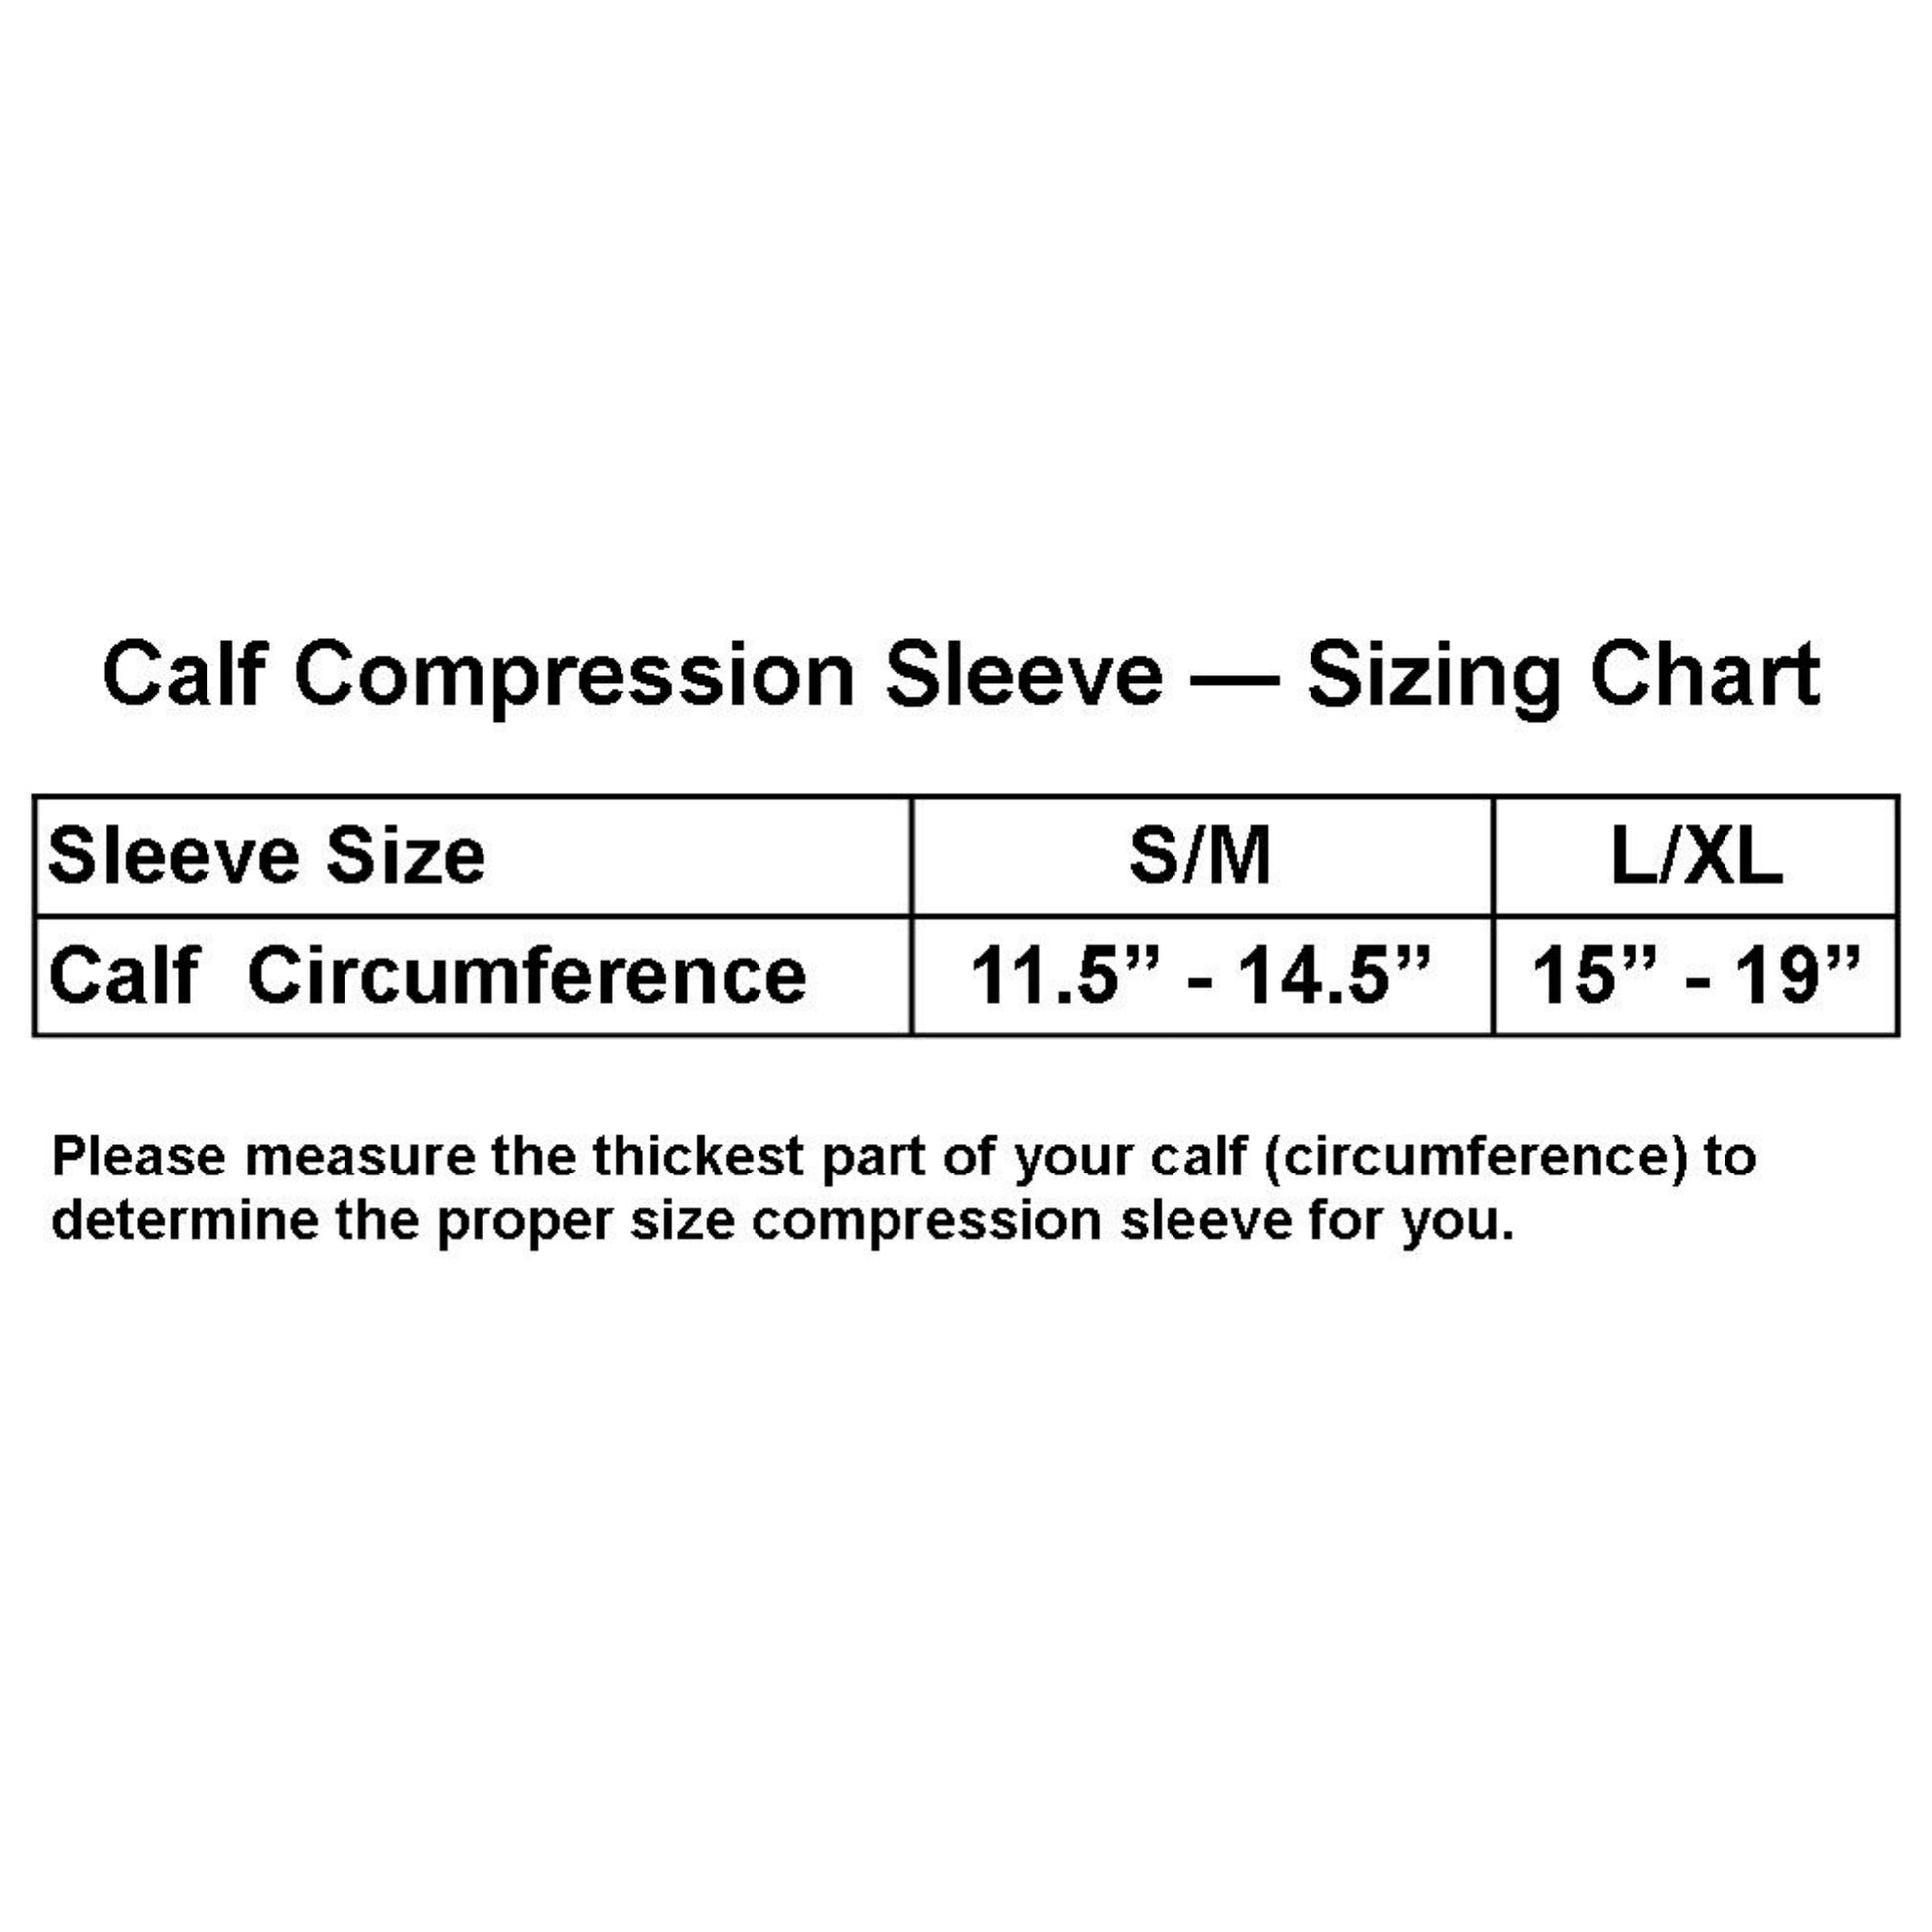 DCF Calf Relief and Performance Compression Sleeves (3-Pairs) – dcfbrands